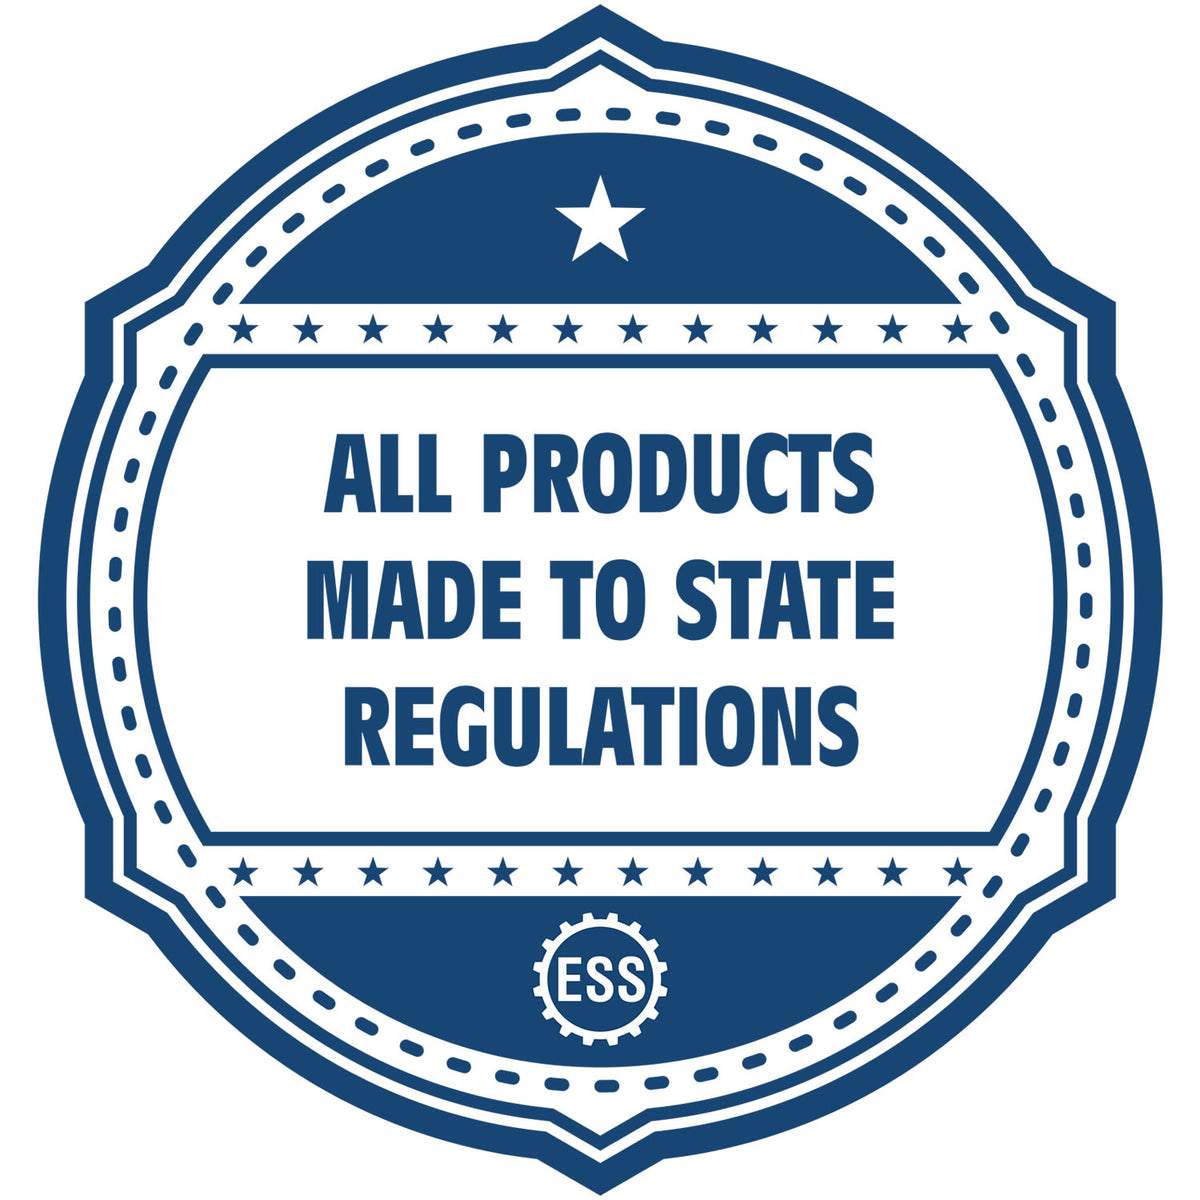 An icon or badge element for the North Dakota Landscape Architectural Seal Stamp showing that this product is made in compliance with state regulations.